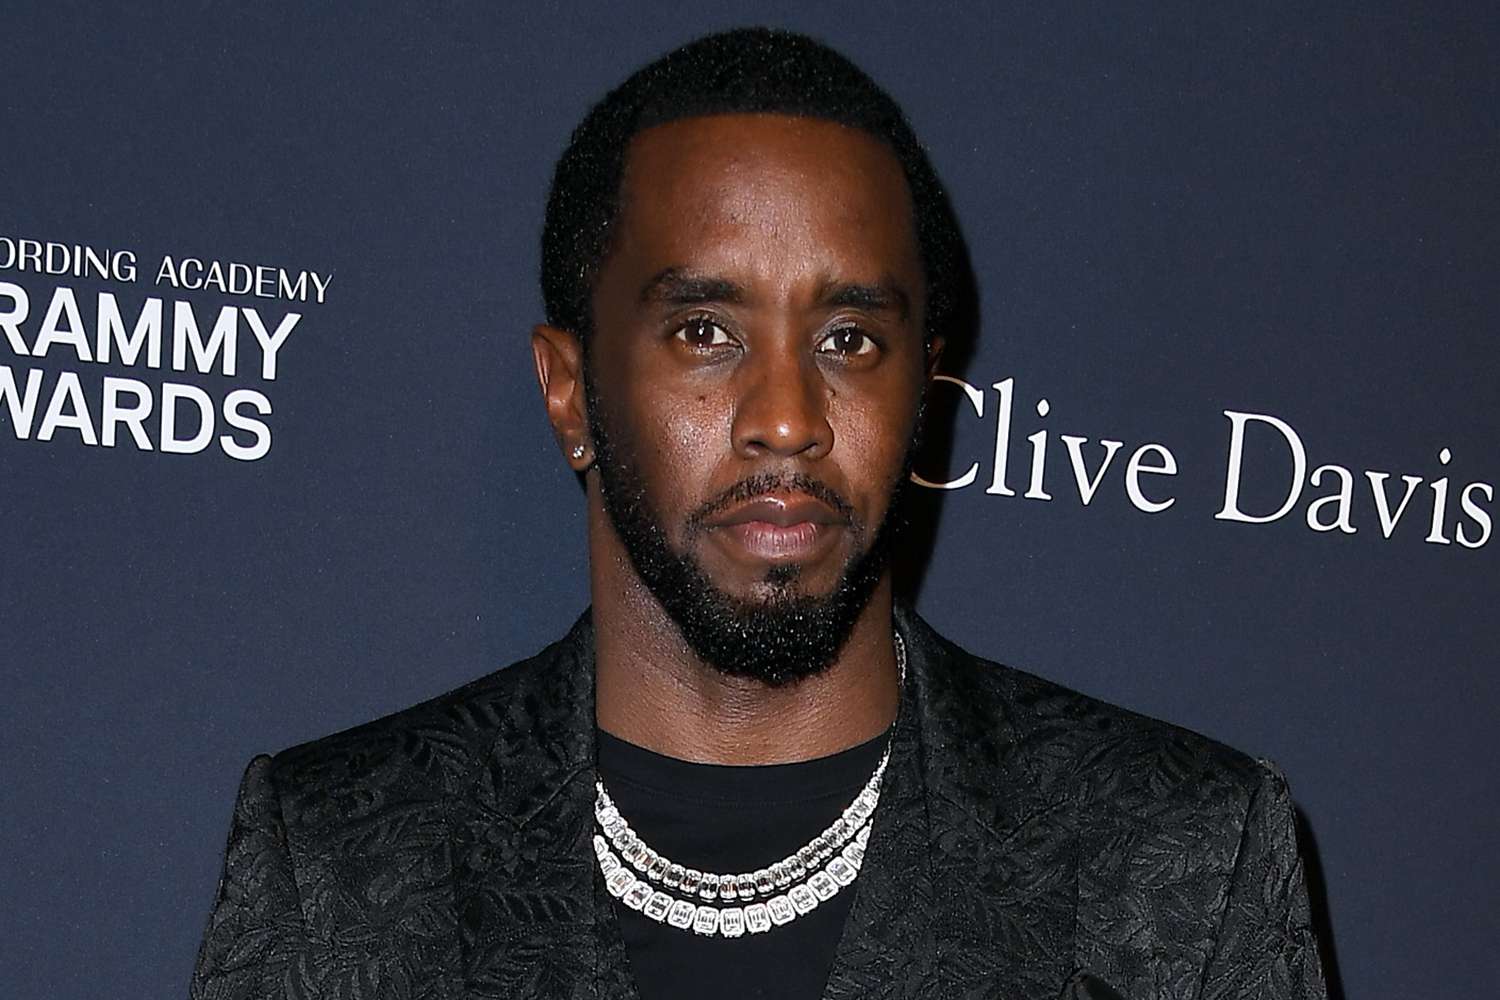 Sean 'Diddy' Combs' Accusers May Testify in Front of Federal Grand Jury: Report